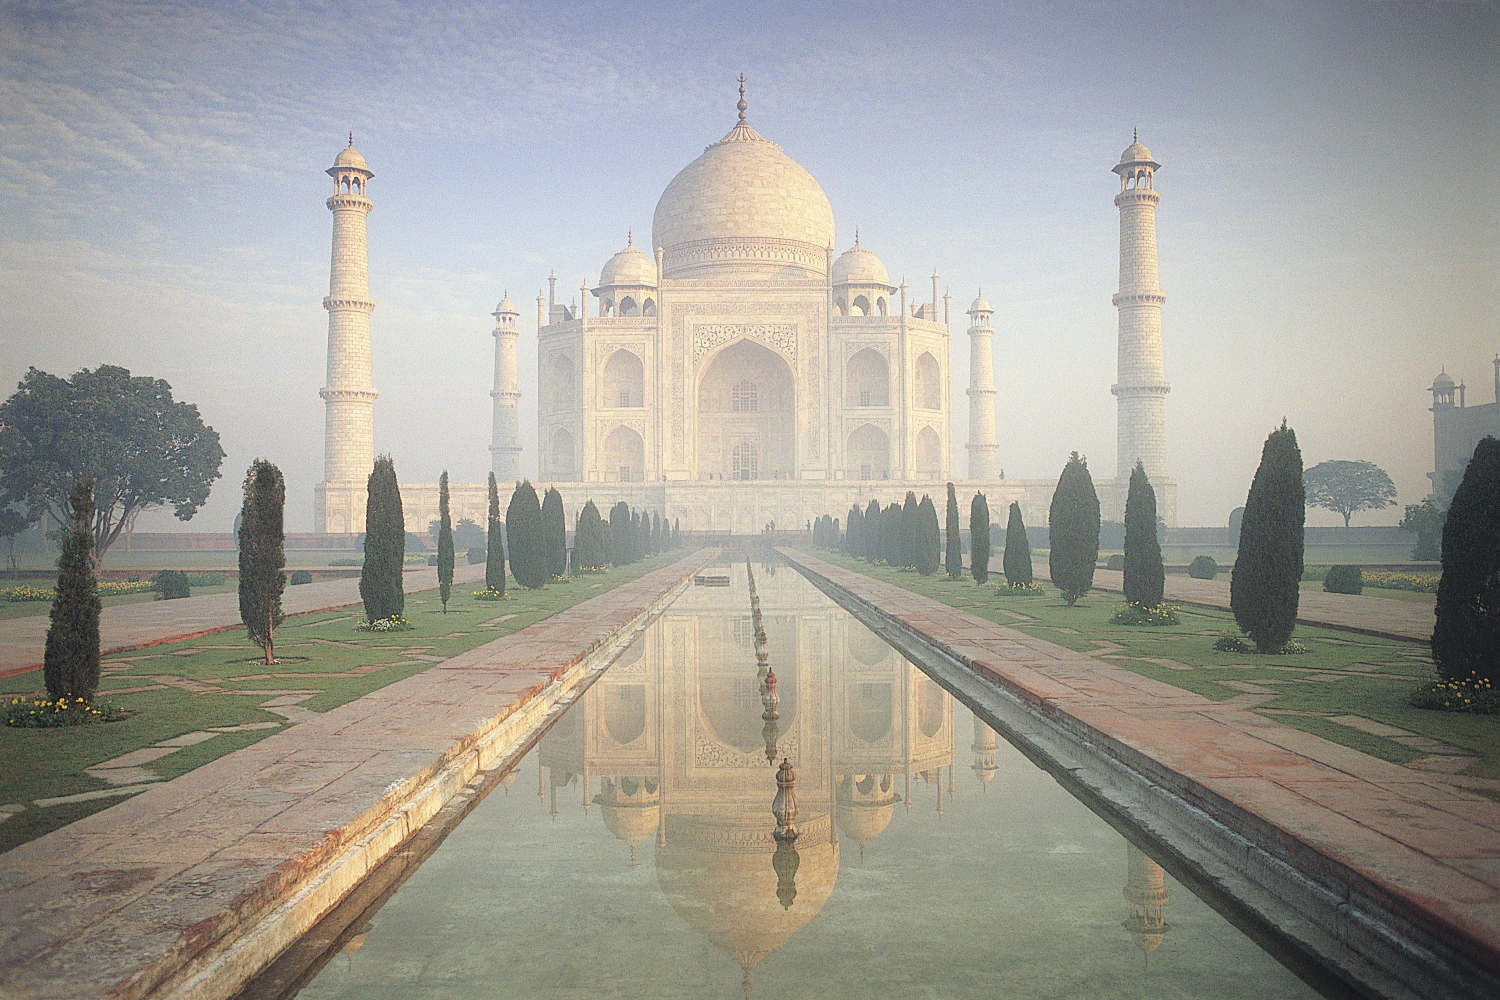 Early morning at the Taj Mahal, Agra. © Peter Adams / Getty Images